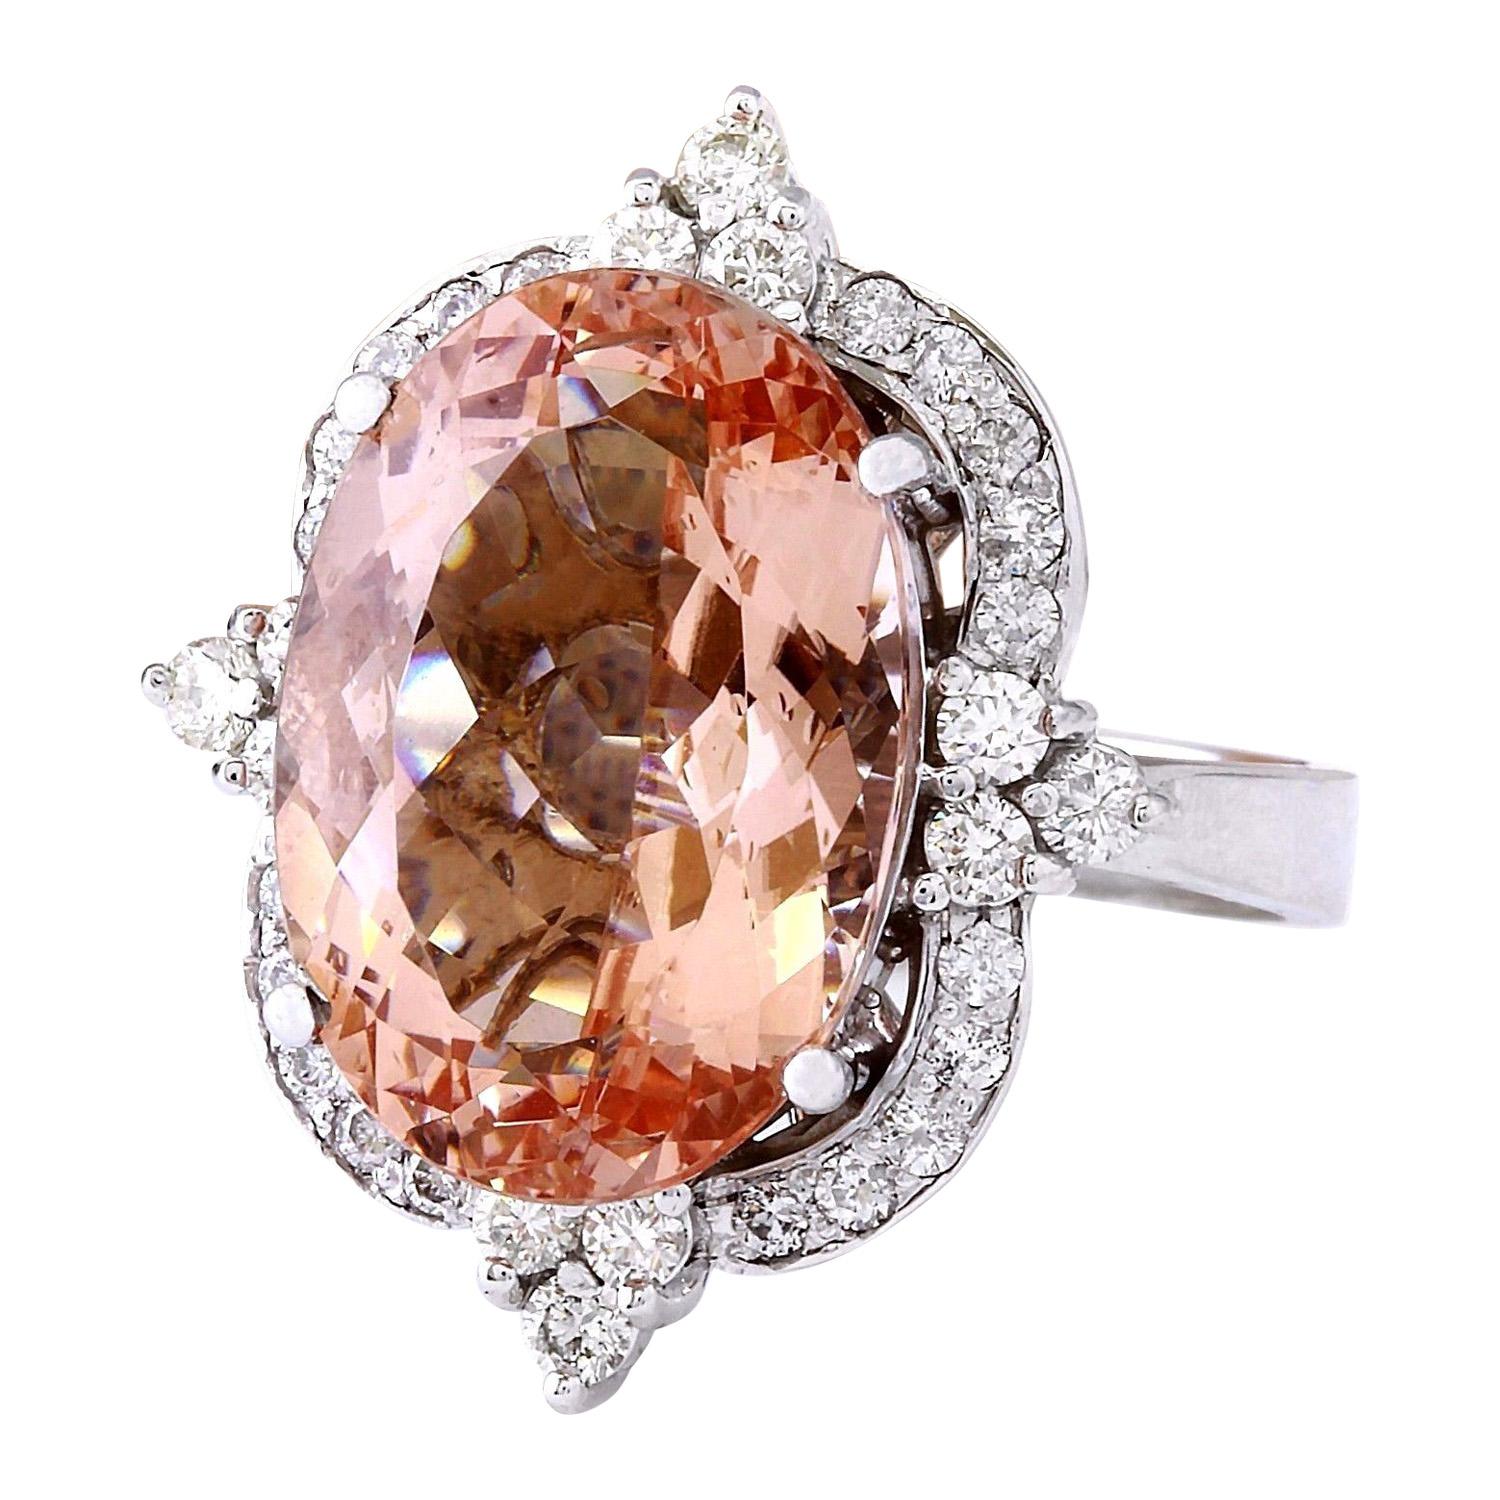 10.91 Carat Natural Morganite 14K Solid White Gold Diamond Ring
 Item Type: Ring
 Item Style: Cocktail
 Material: 14K White Gold
 Mainstone: Morganite
 Stone Color: Peach
 Stone Weight: 10.11 Carat
 Stone Shape: Oval
 Stone Quantity: 1
 Stone